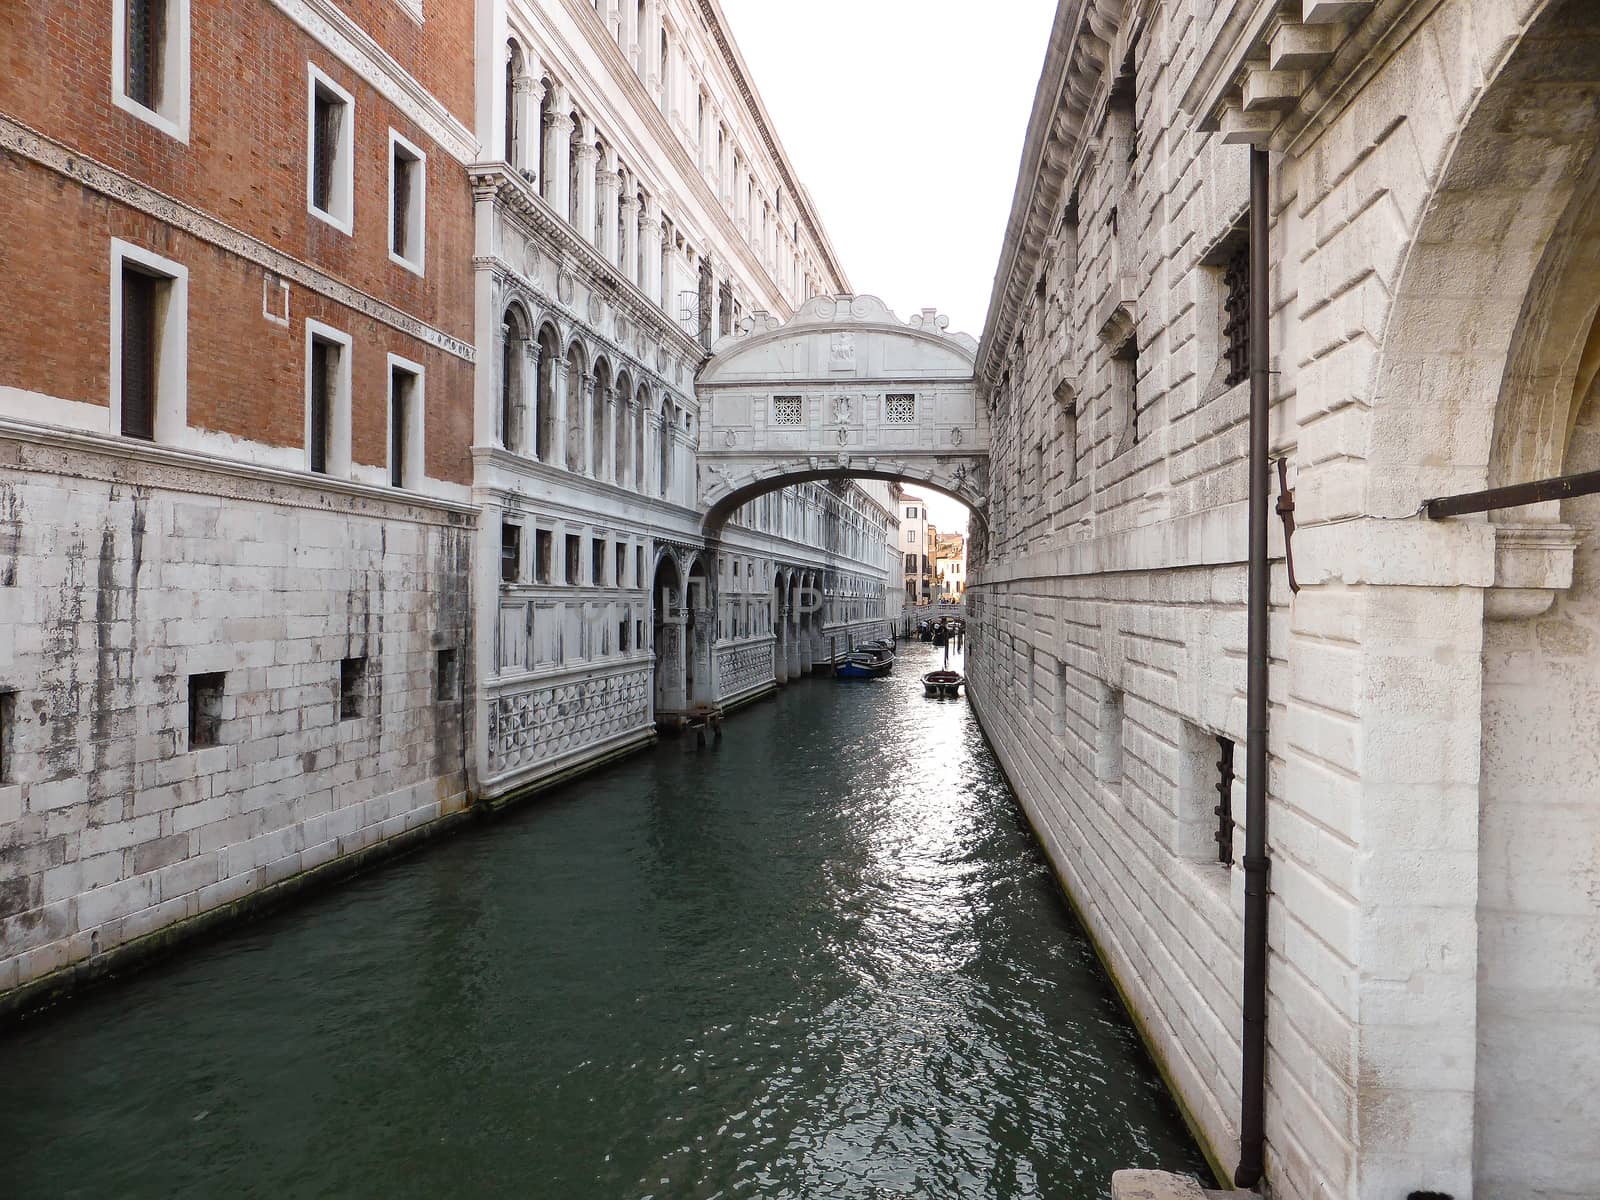 The Bridge of Sighs by paocasa